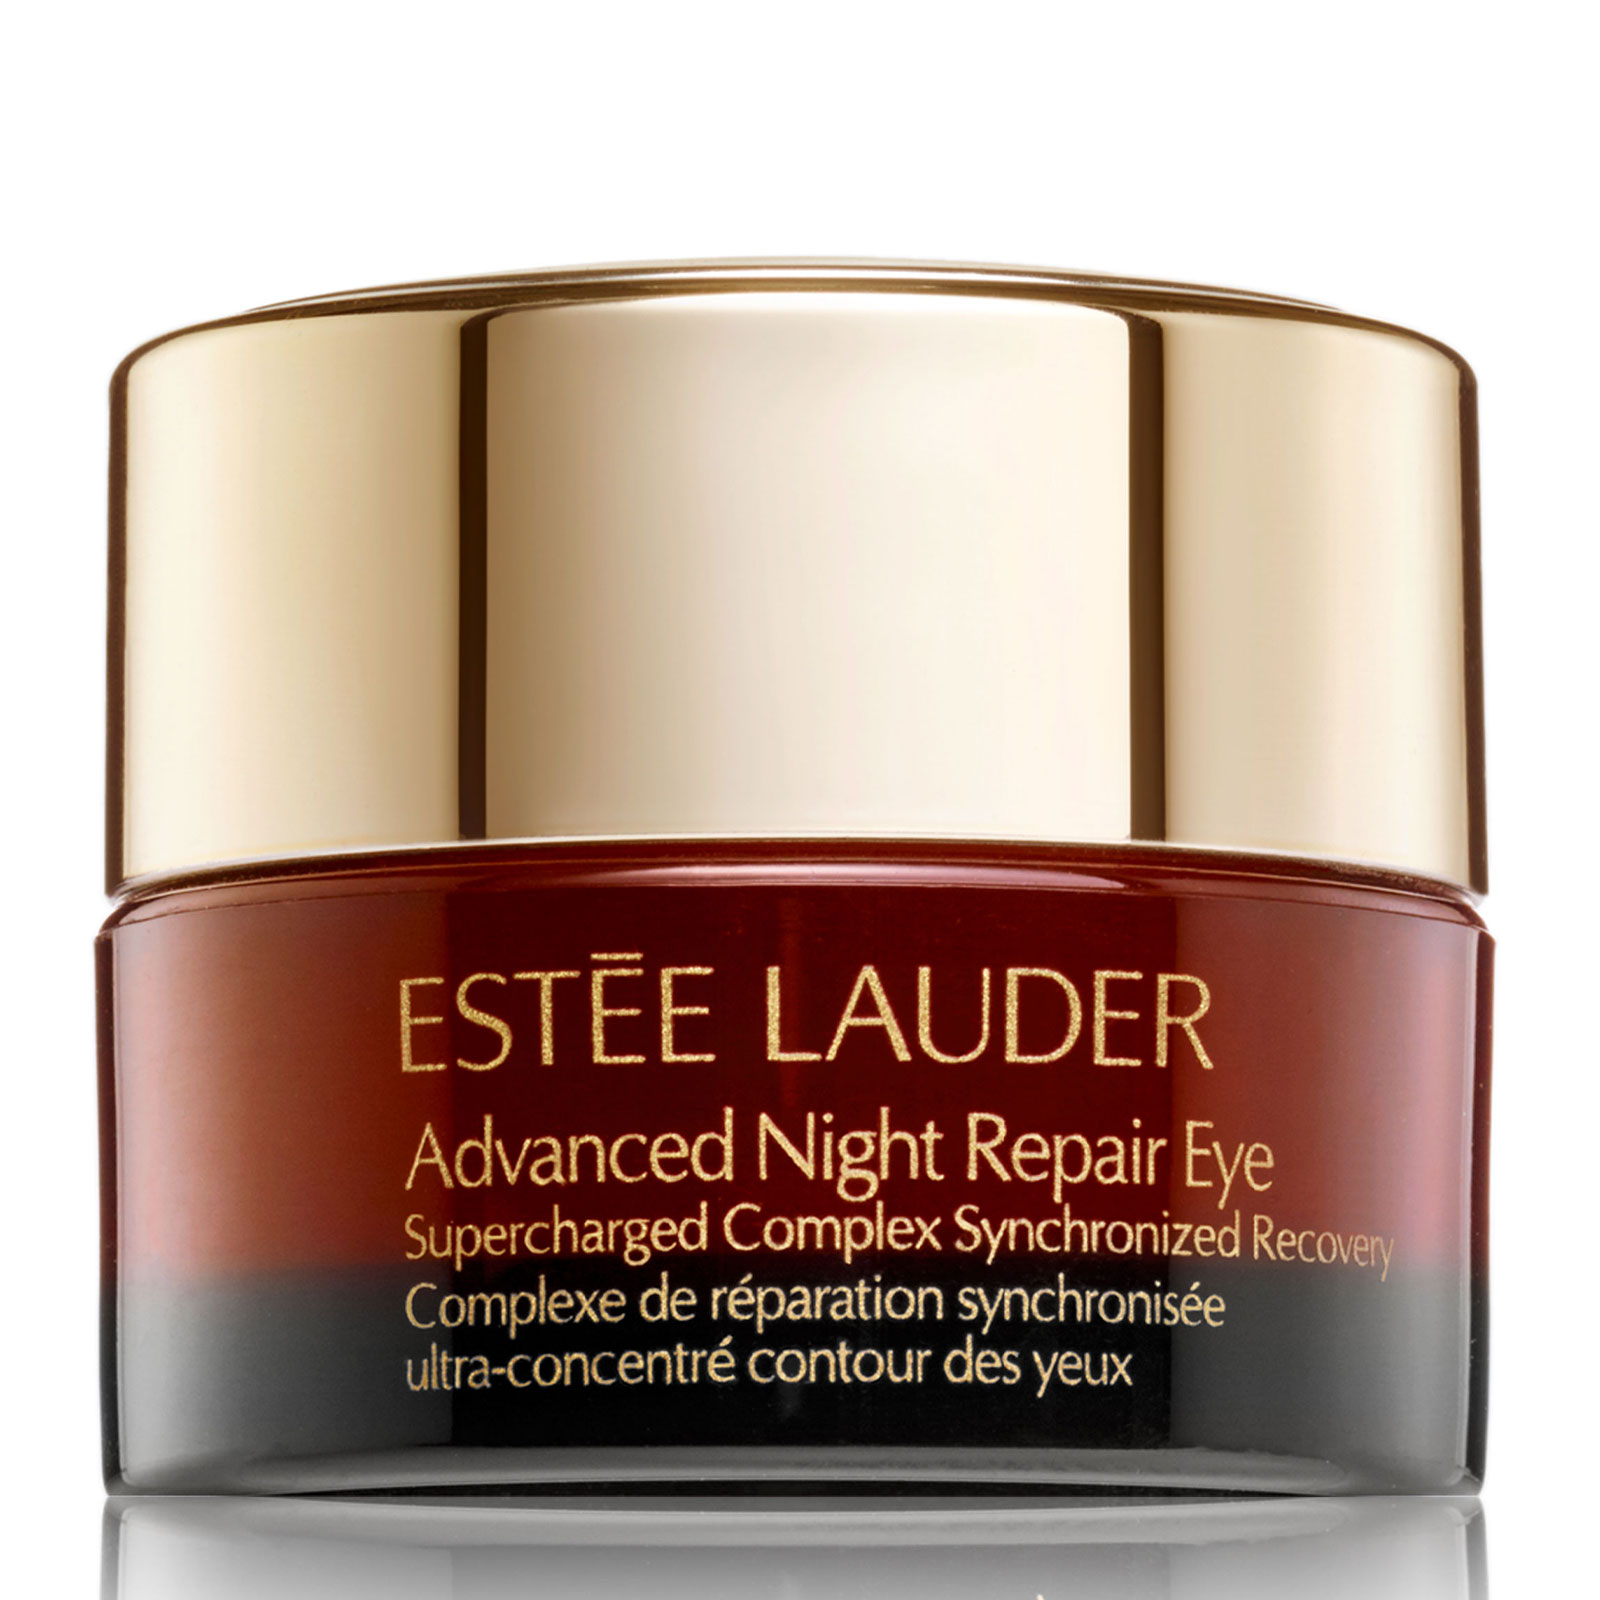 Est�e Lauder Advanced Night Repair Eye Supercharged Complex Synchronized Recovery 5ml